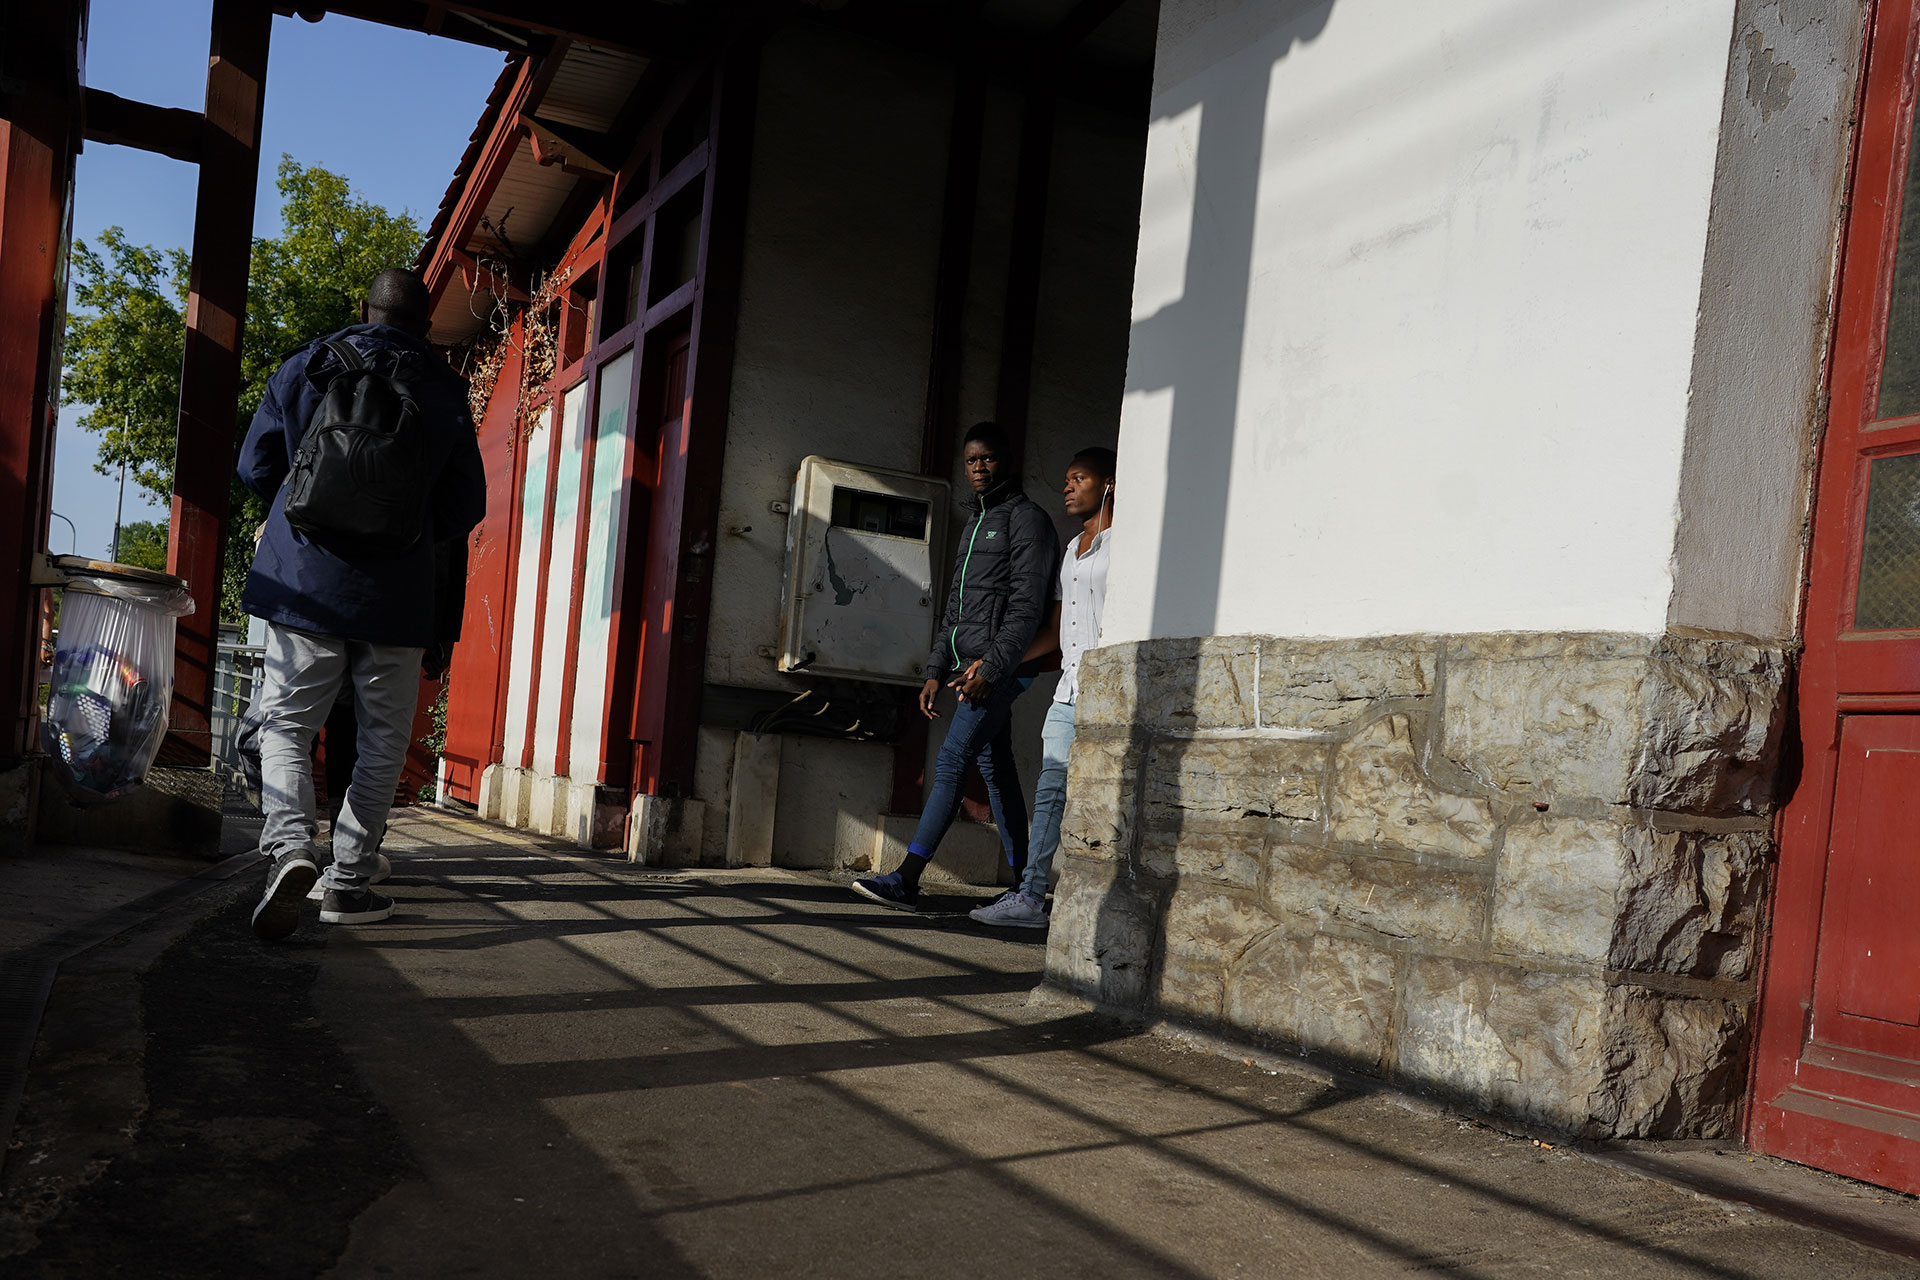 Ousmane arrives at a train station with three companions before taking a train to try to reach Bayonne, September 17, 2019.